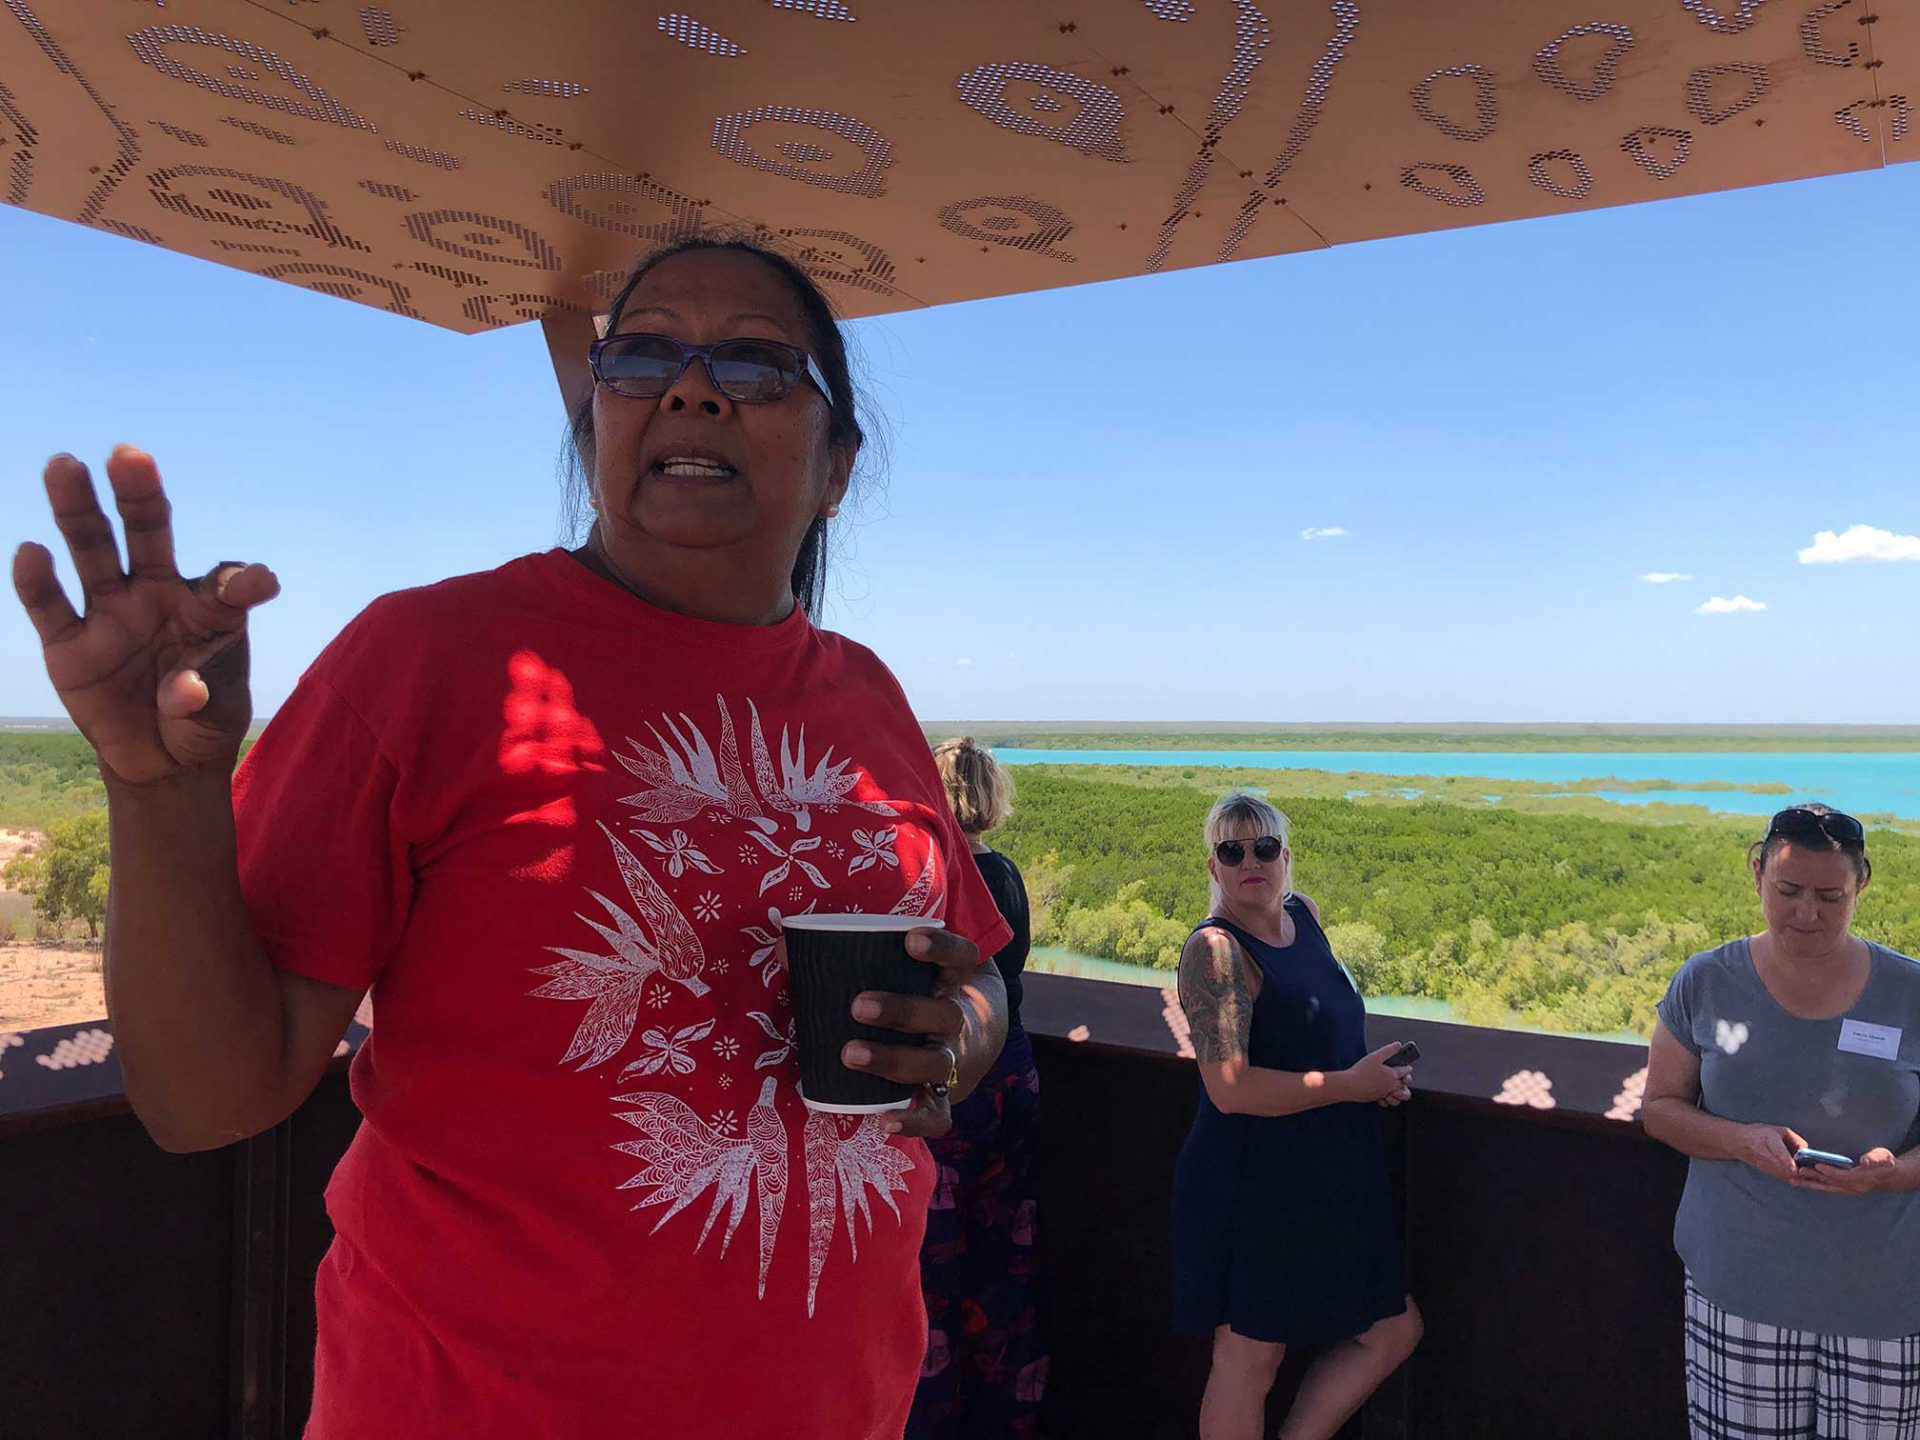 Lynette Yu-Mackay (AACHWA and Nagula Jarndu Designs Chairperson) speaking about the history of Broome and providing a welcome to forum participants.